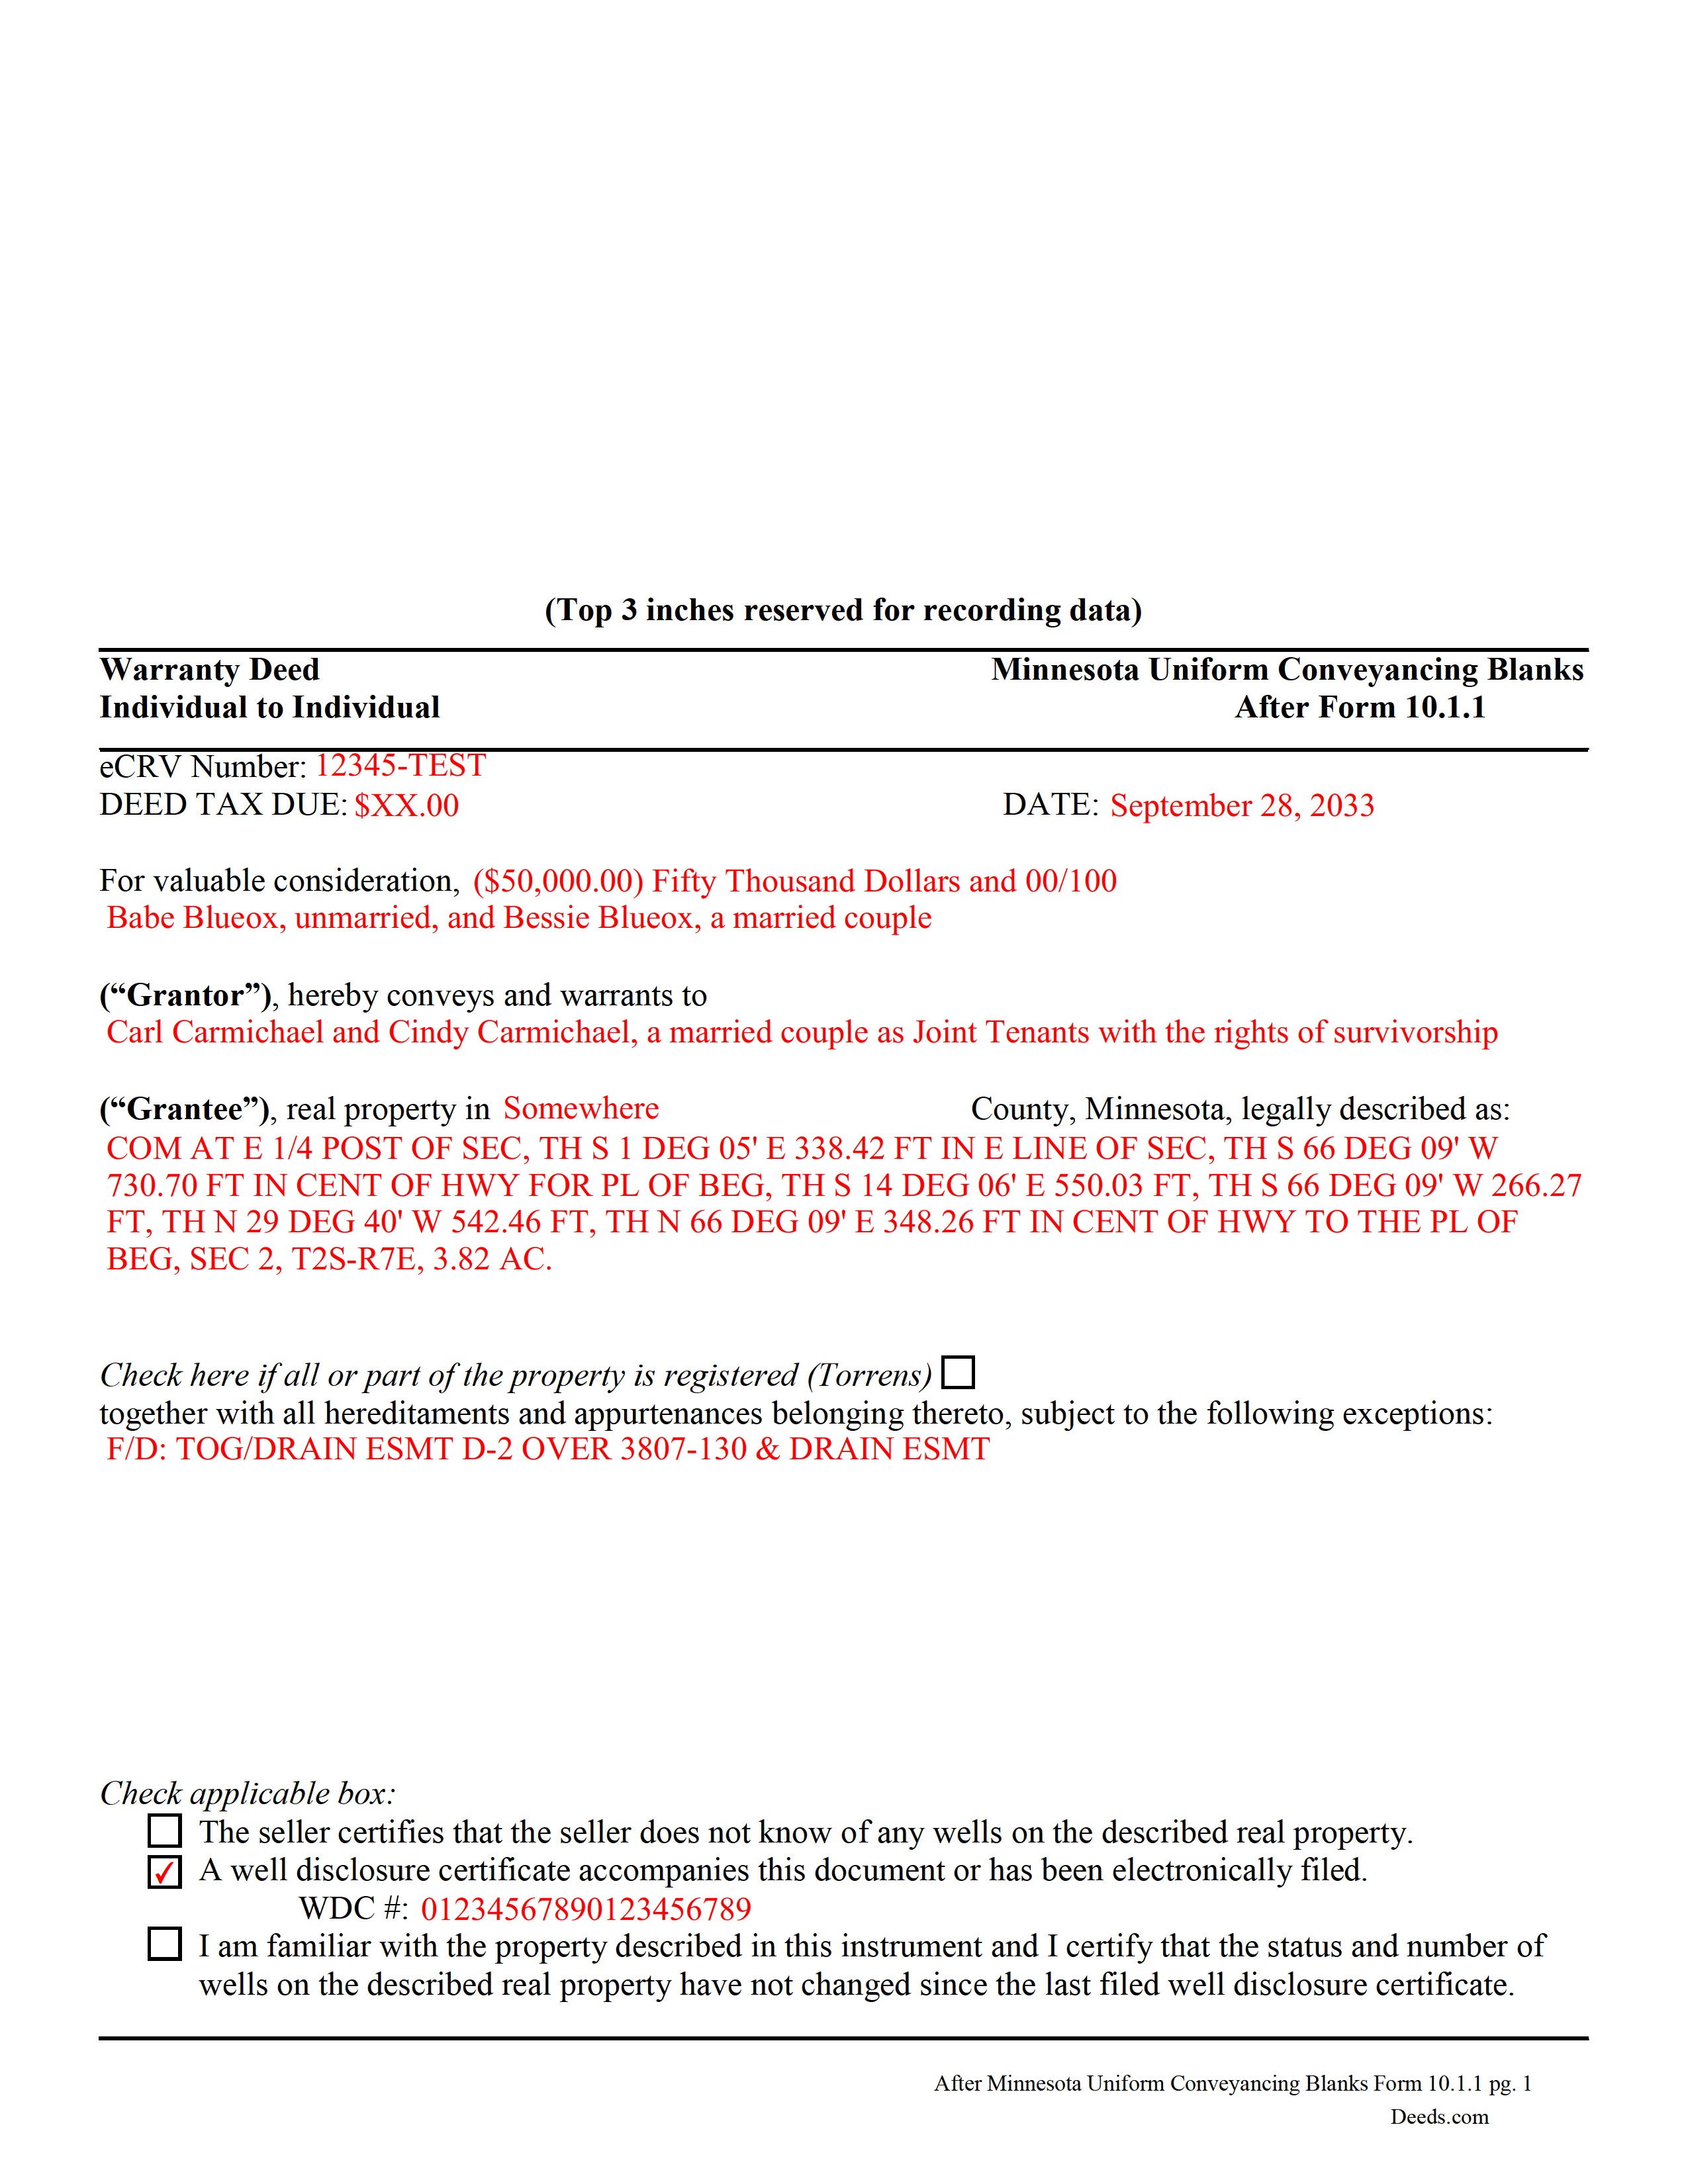 Completed Example of the Warranty Deed Form